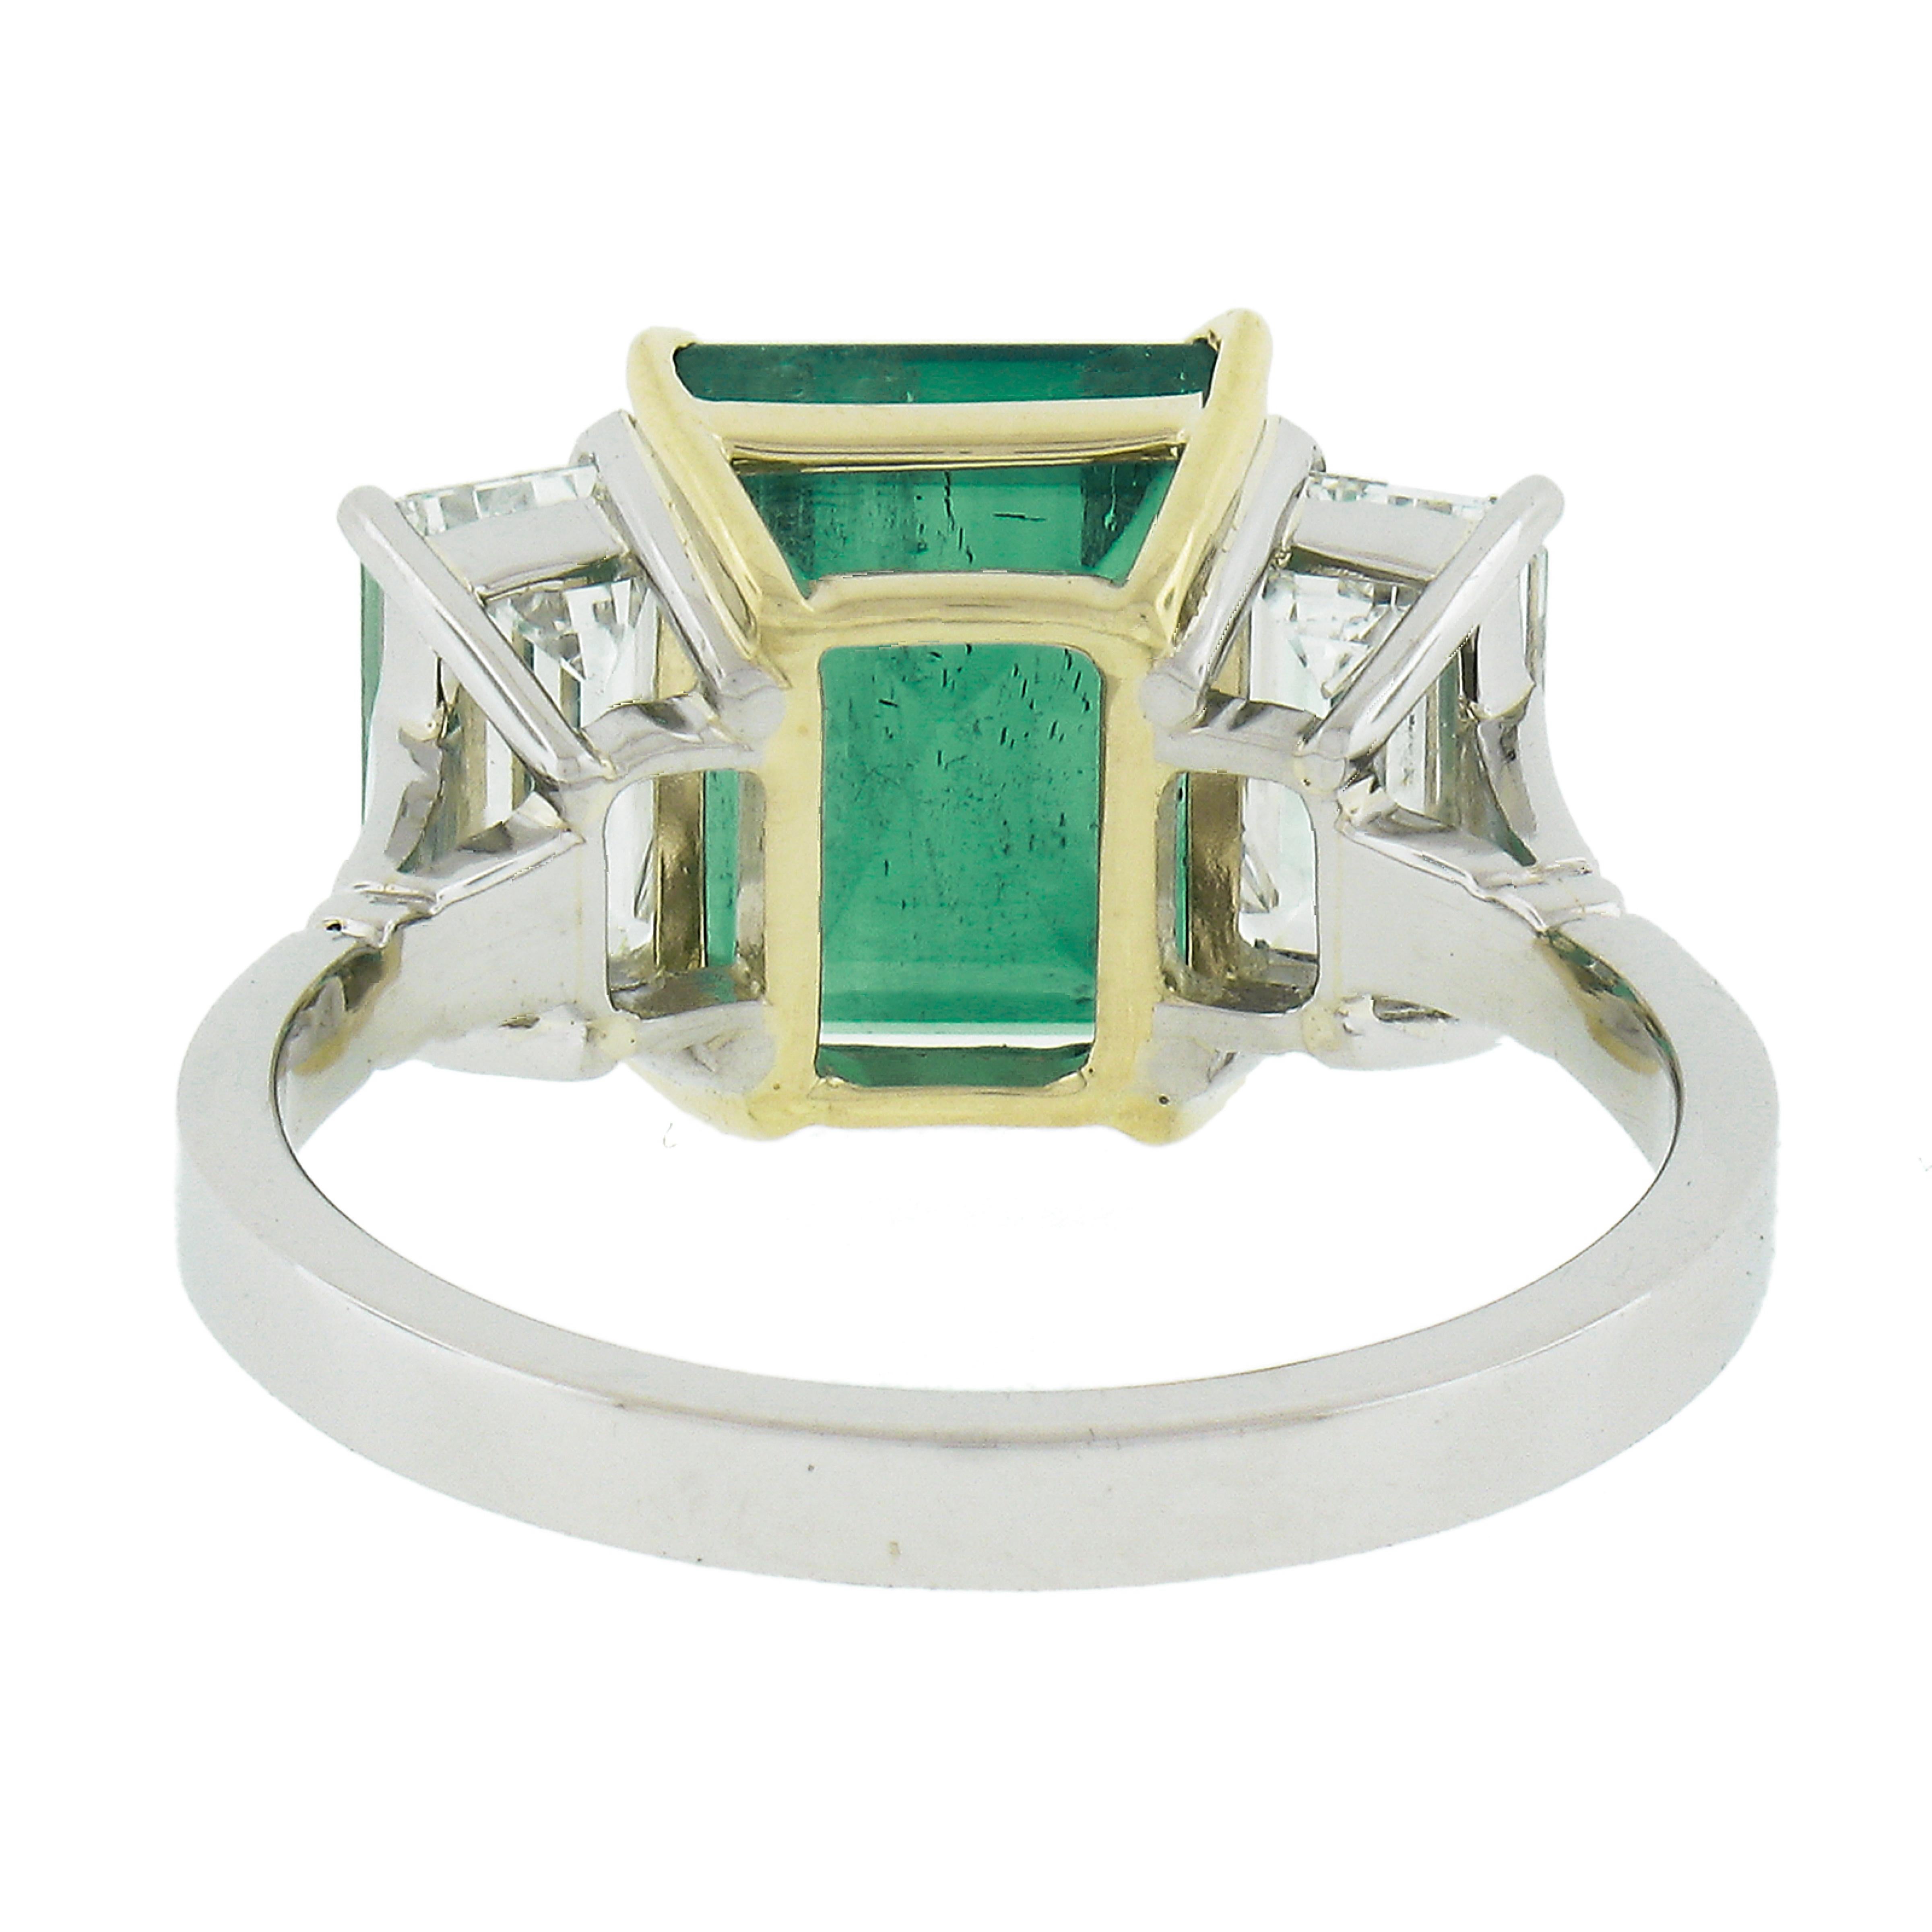 New Platinum 18k Gold 5.13ctw AGL Colombian Emerald & Gia Diamond Cocktail Ring For Sale 2